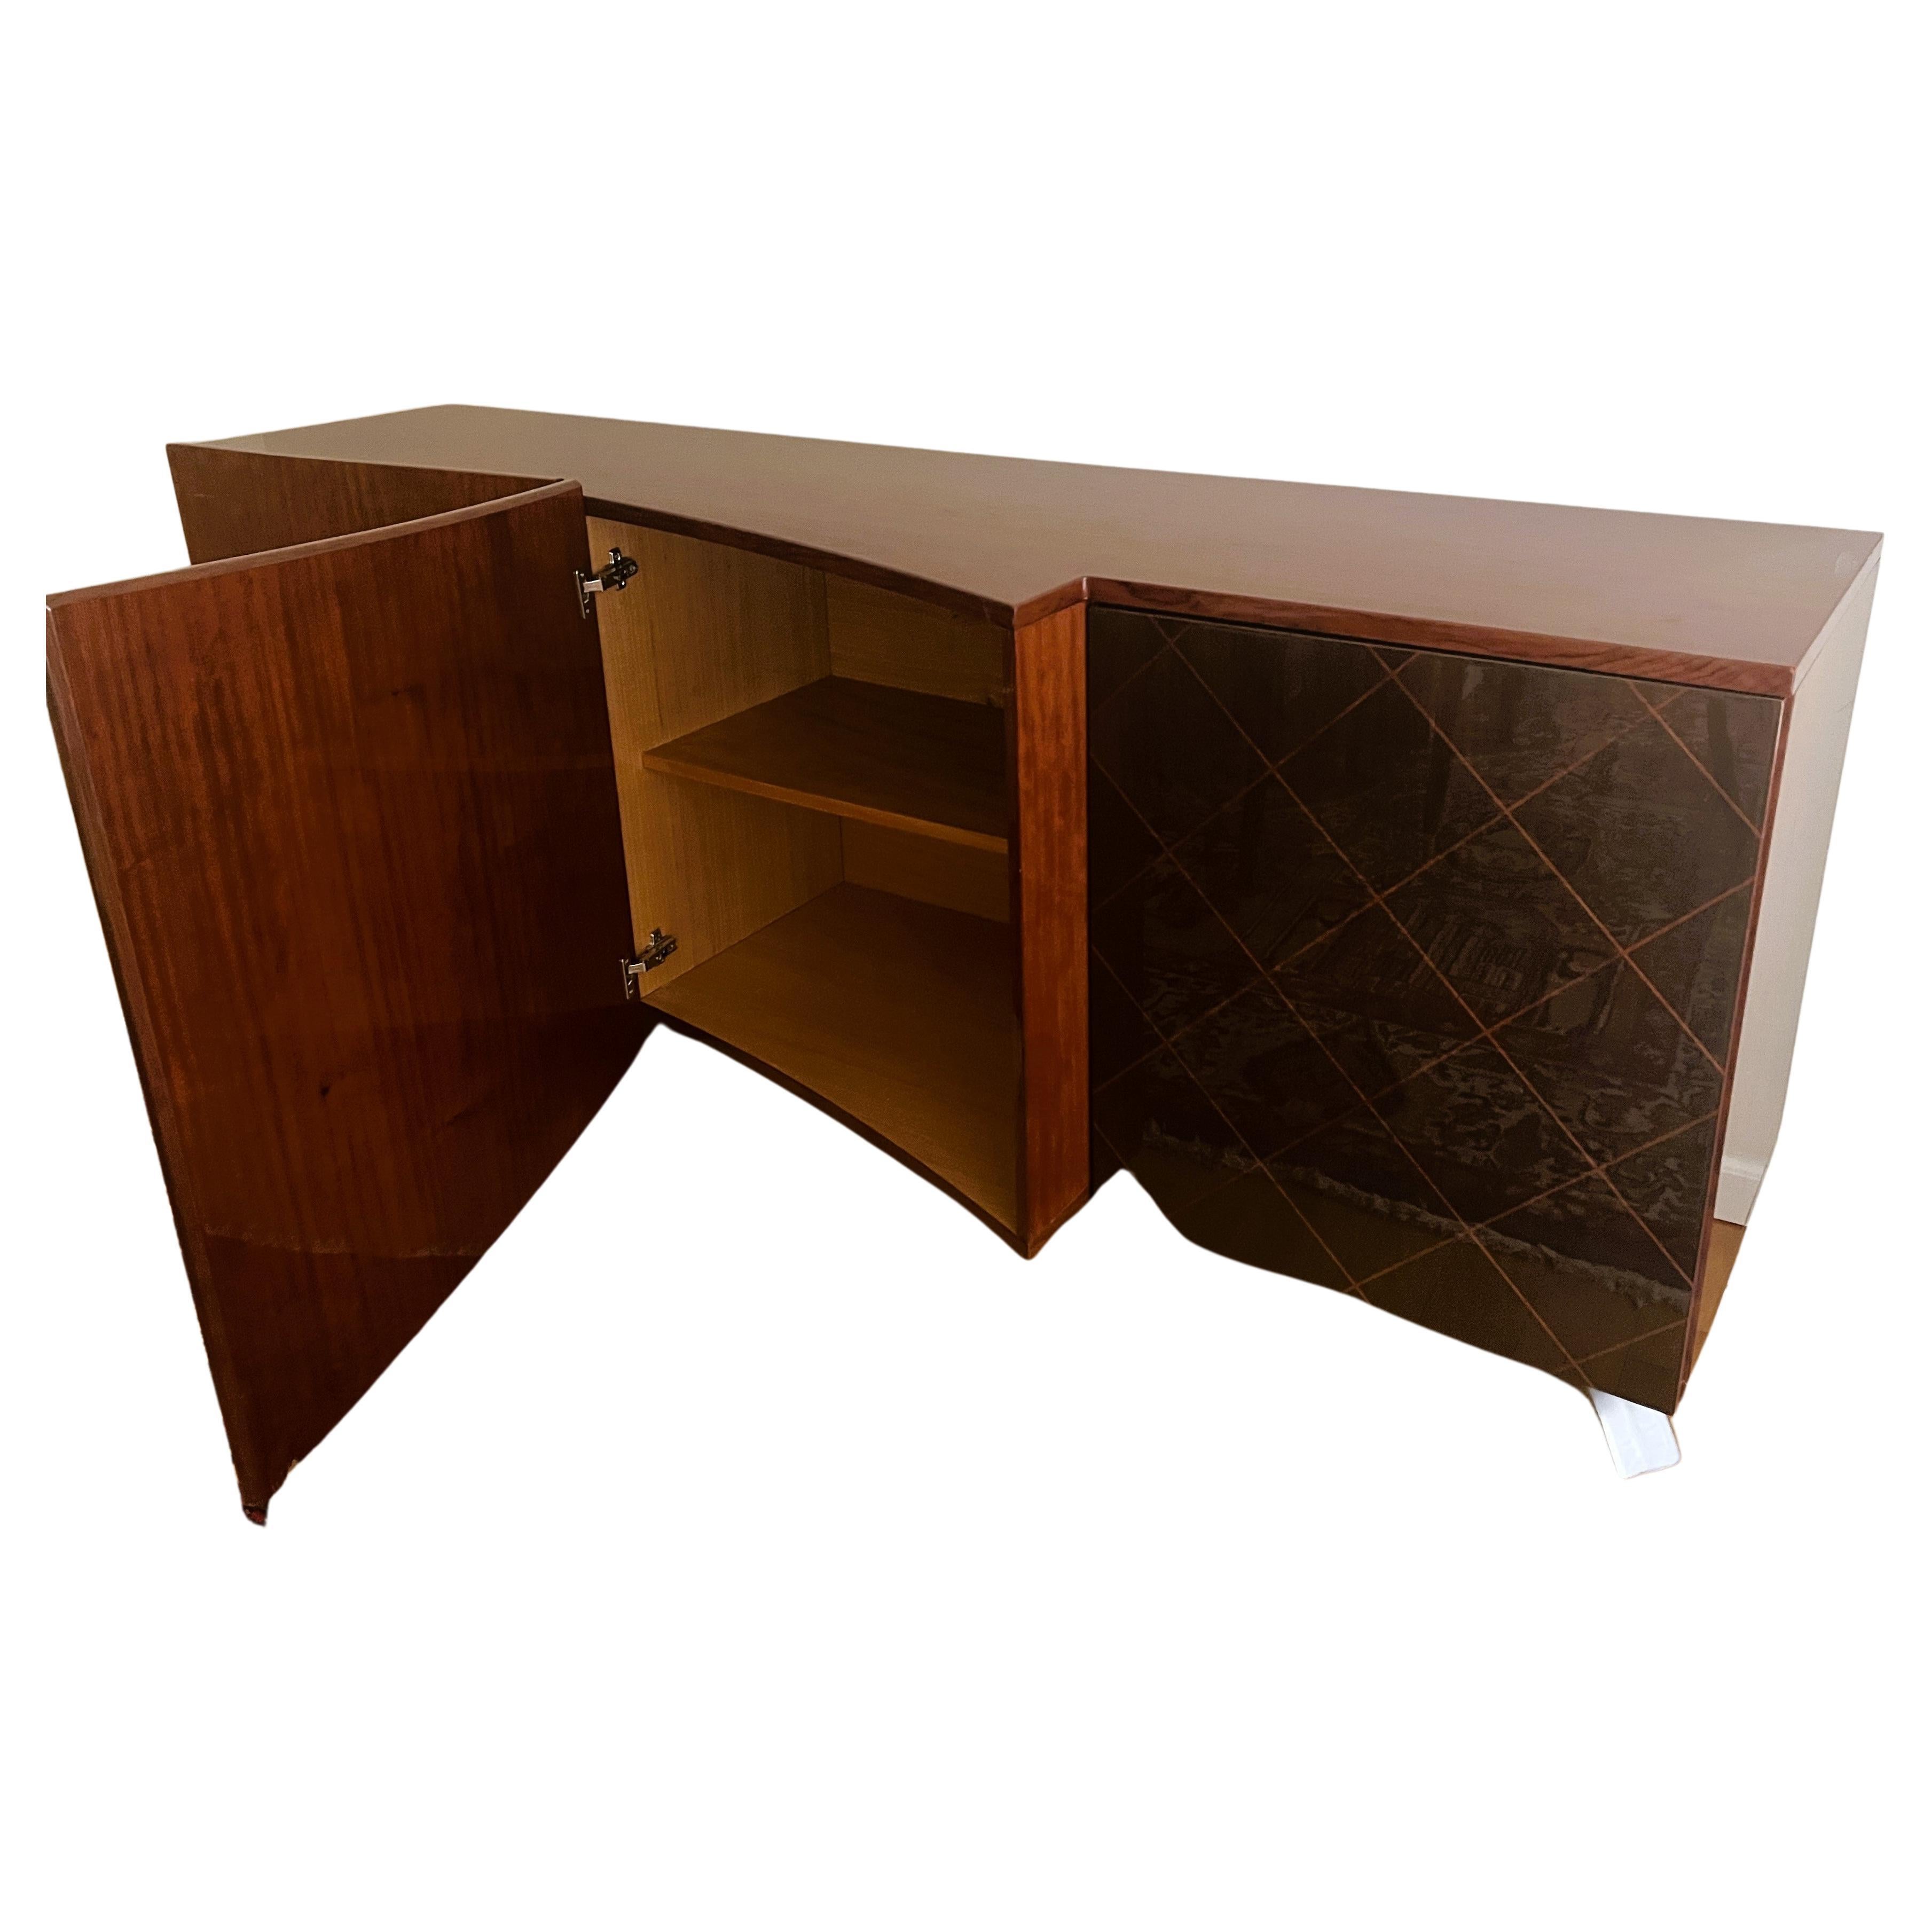 This stunning Dakota Jackson credenza made of rosewood exemplifies the best of American modern design with hints of Danish style. Crafted in Italy by skilled artisans, it boasts a generous amount of storage with three doors – two featuring